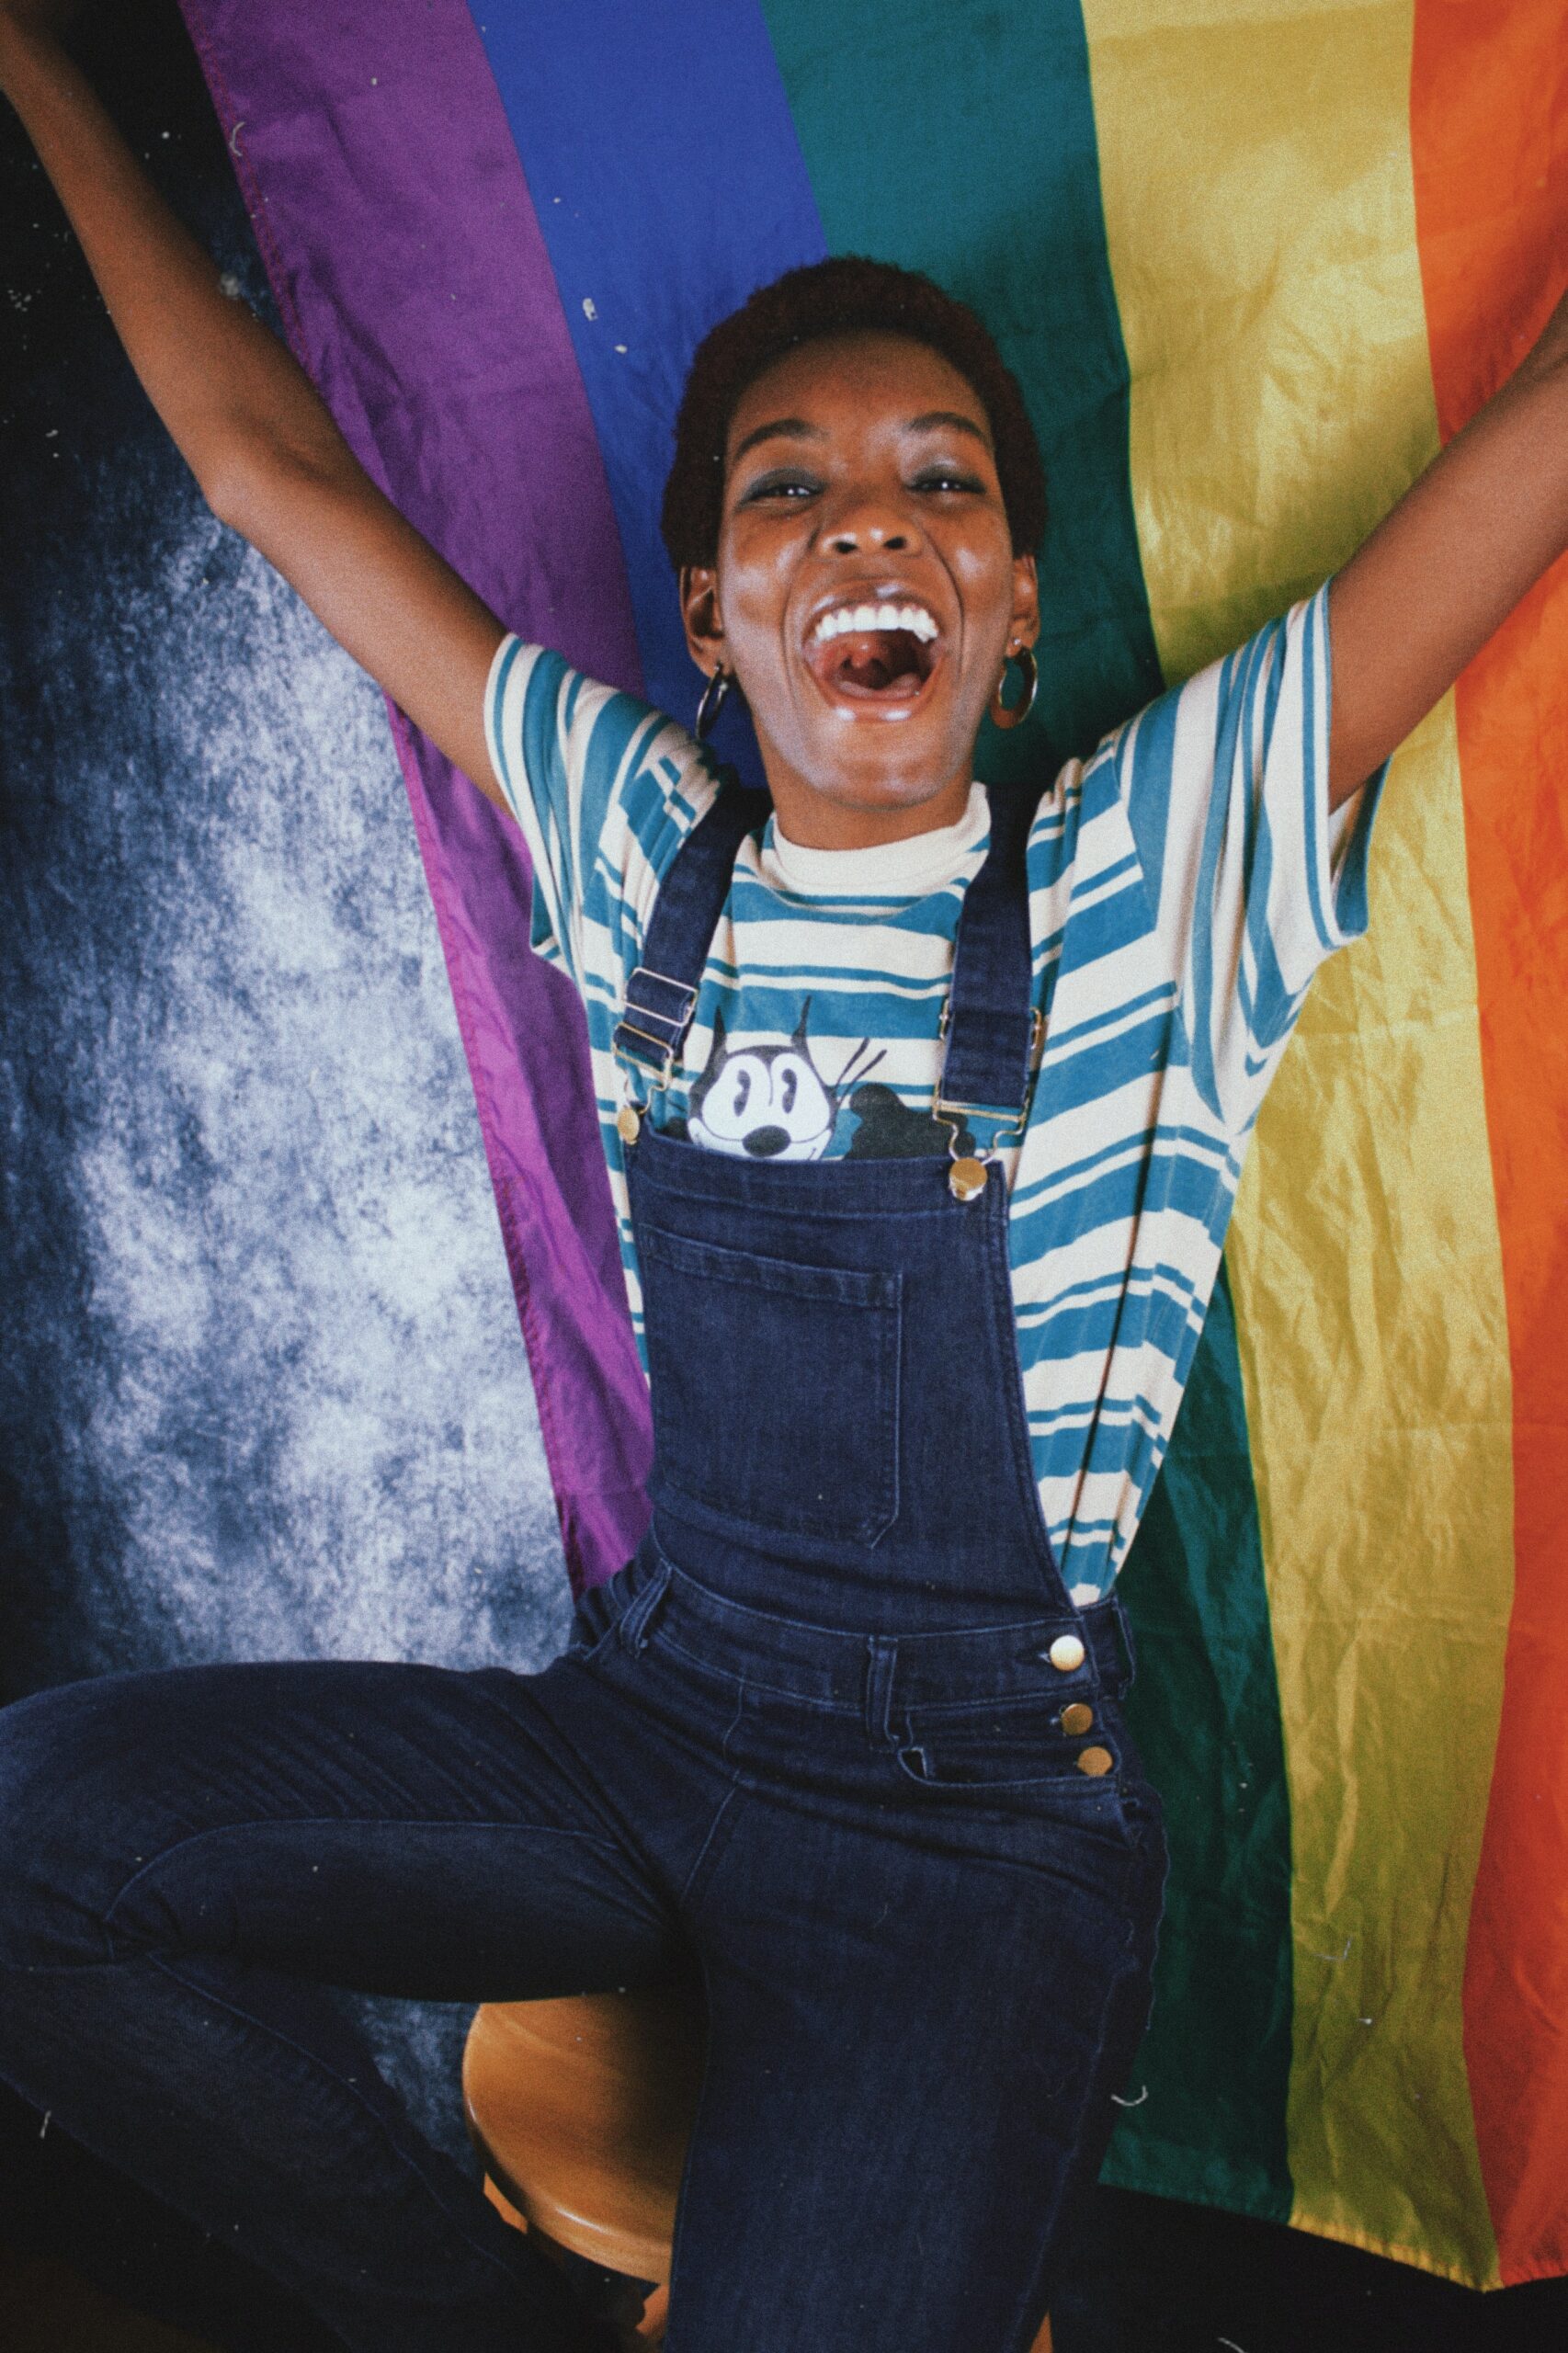 A smiling woman holding a rainbow pride flag